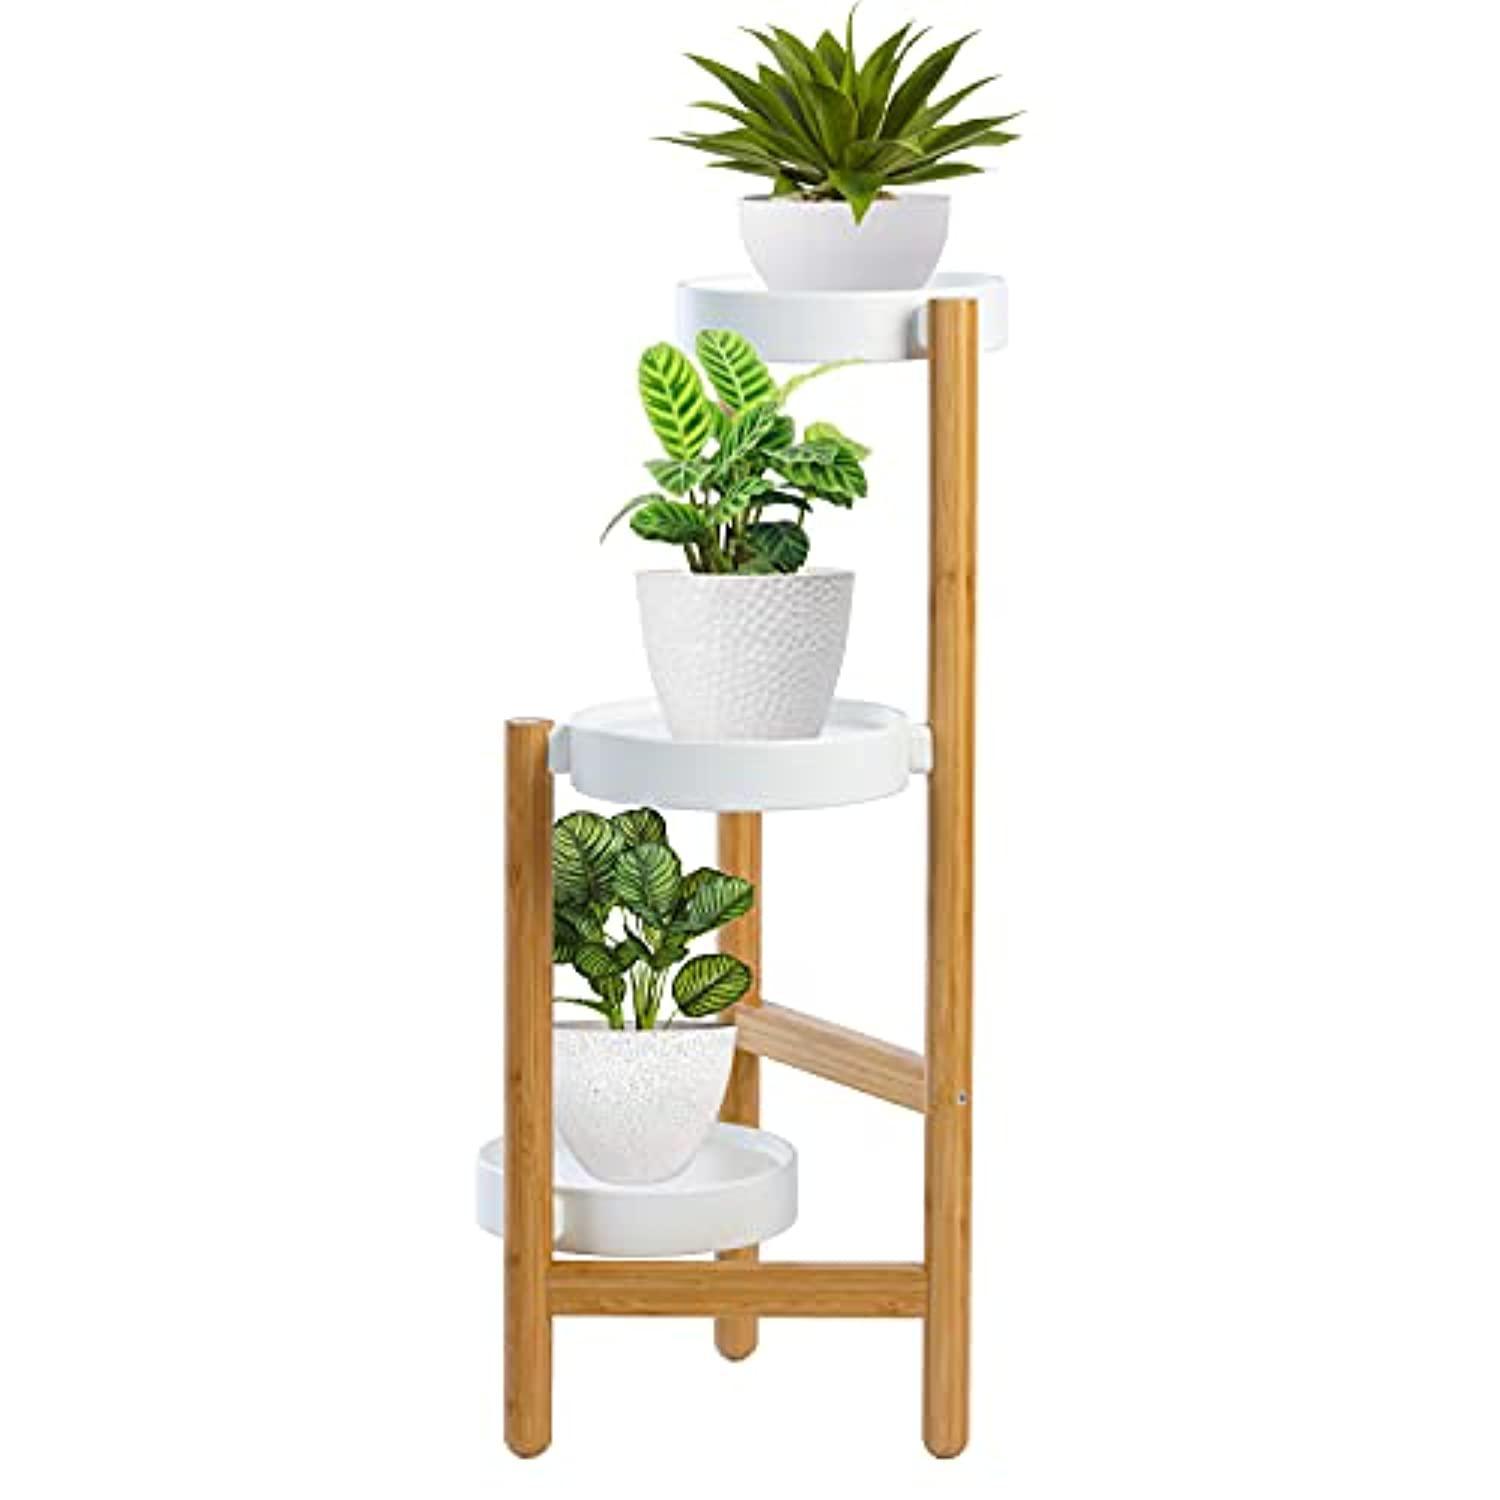 9 plus 3-tier bamboo plant rack, plant stand shelf unit holder indoor and outdoor